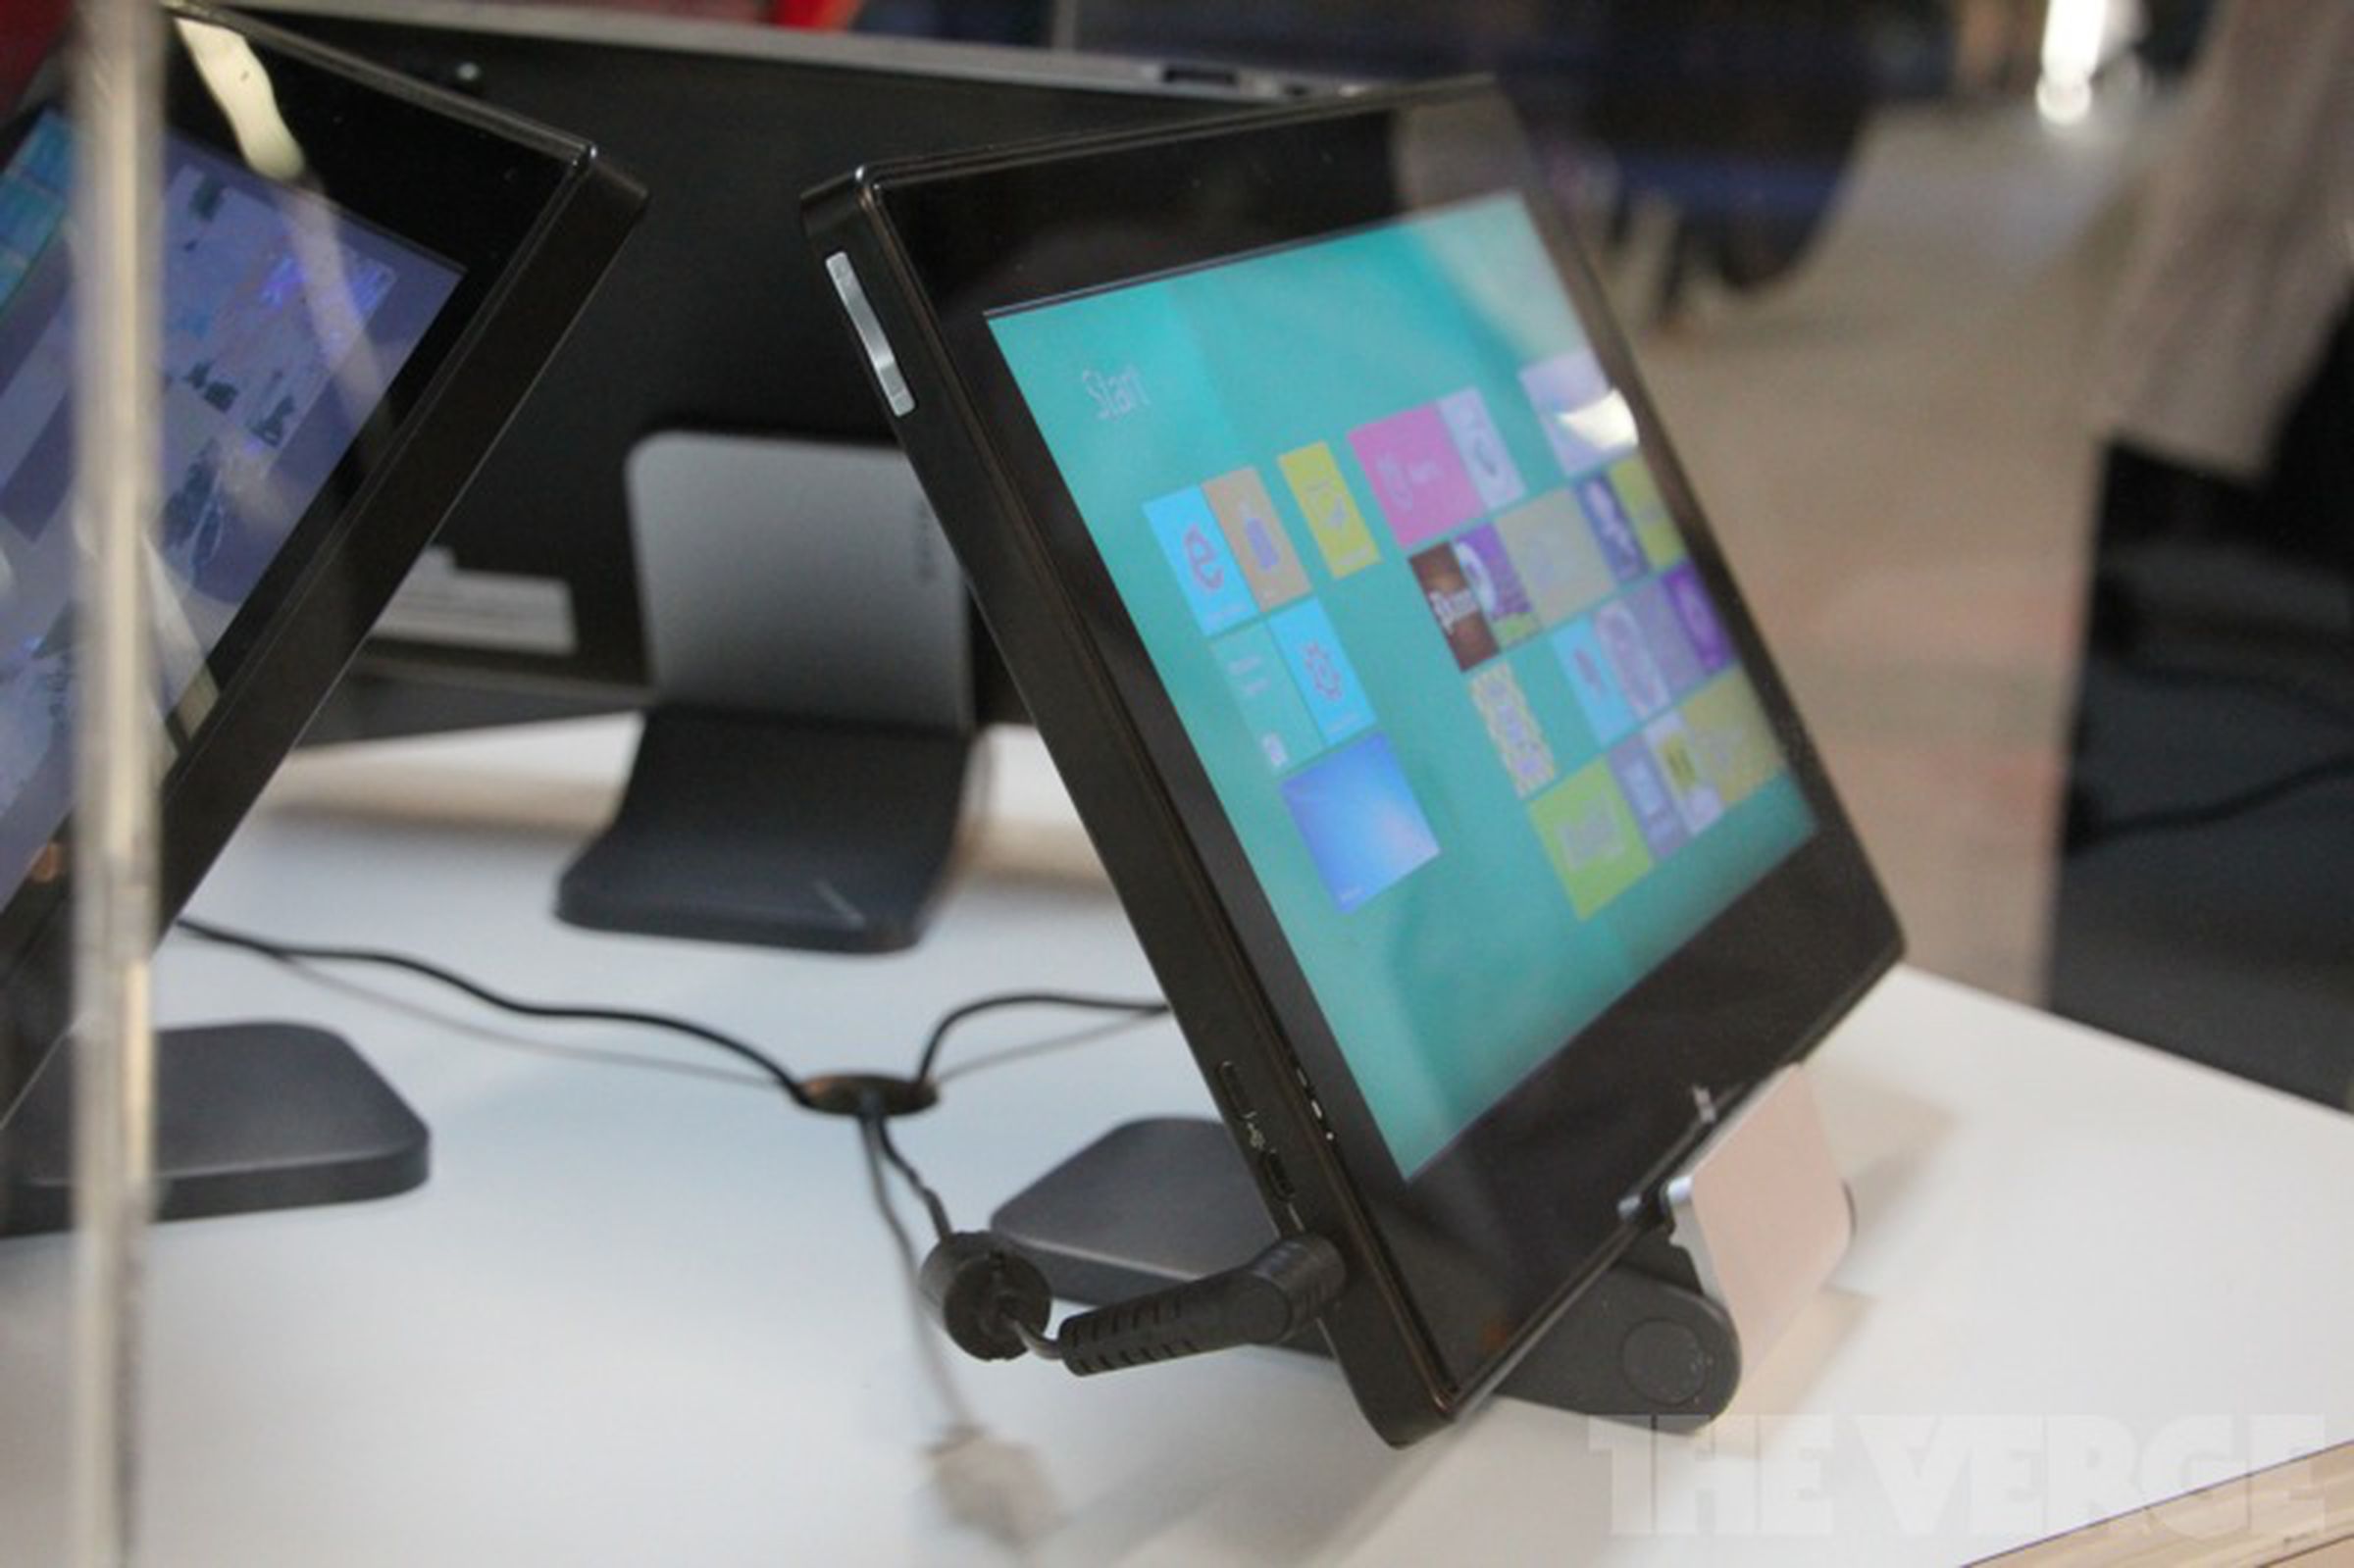 Texas Instruments reference design tablet hands-on photos